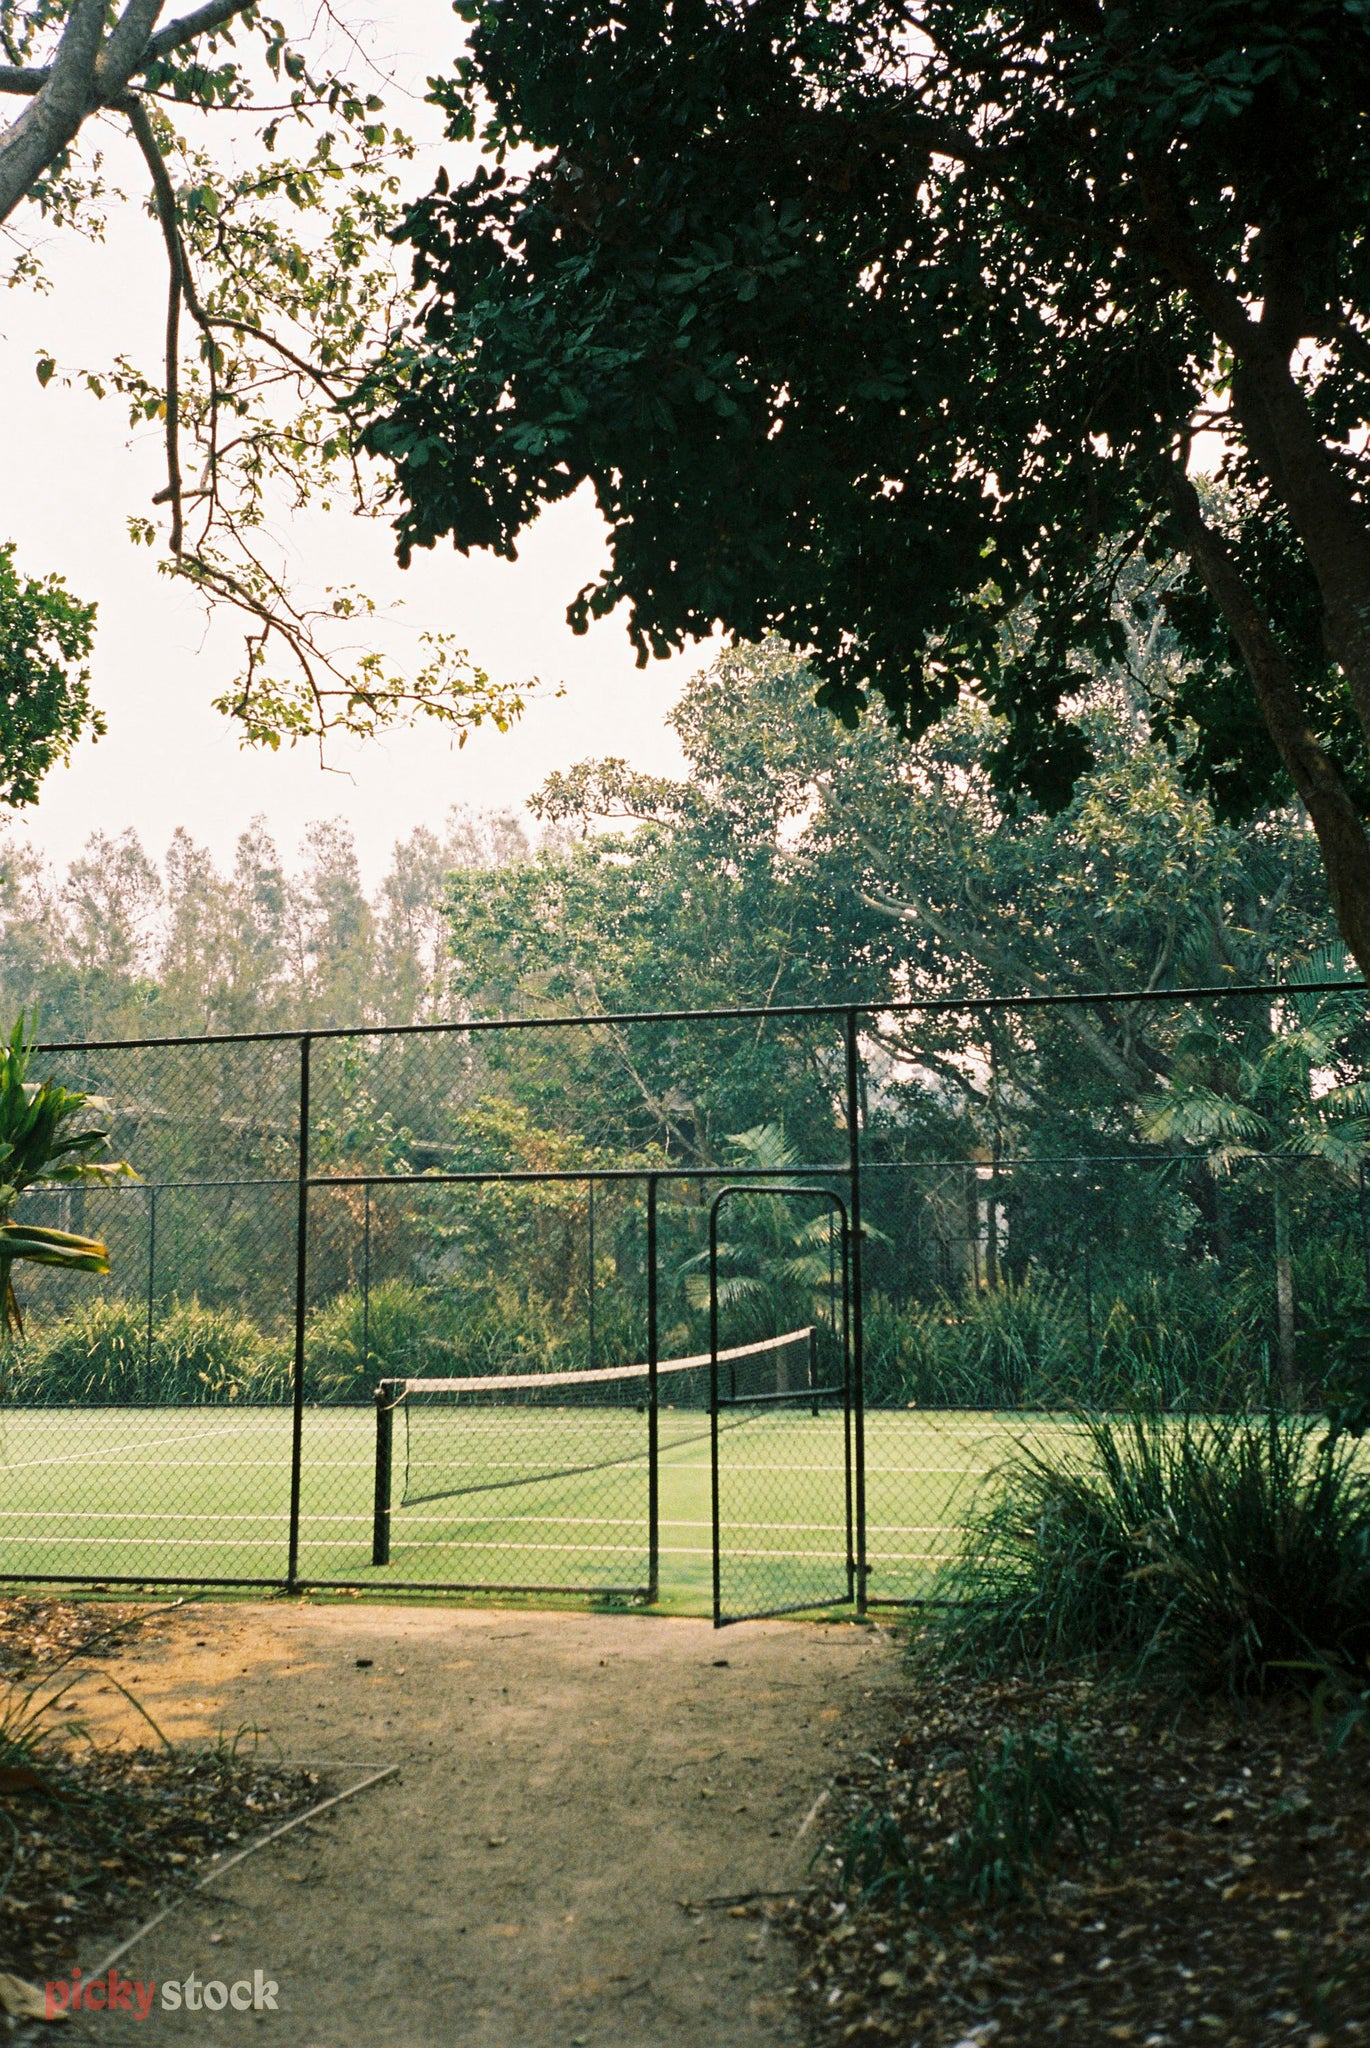 Peeking through the trees to a private grass tennis court, on private property. The gate is half ajar. 